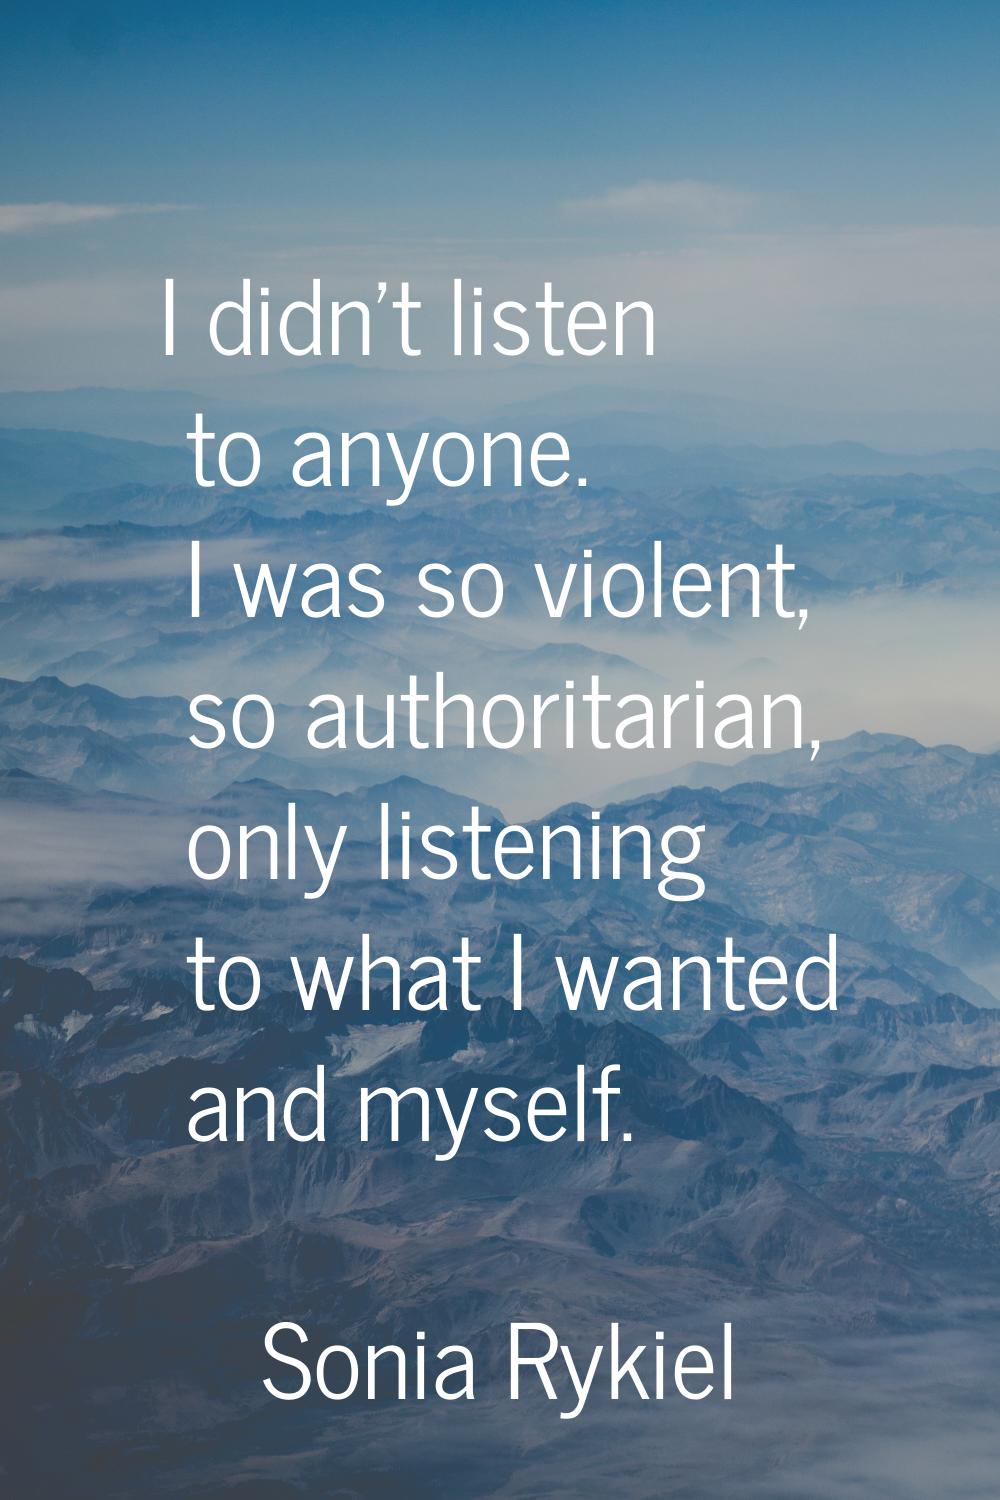 I didn't listen to anyone. I was so violent, so authoritarian, only listening to what I wanted and 